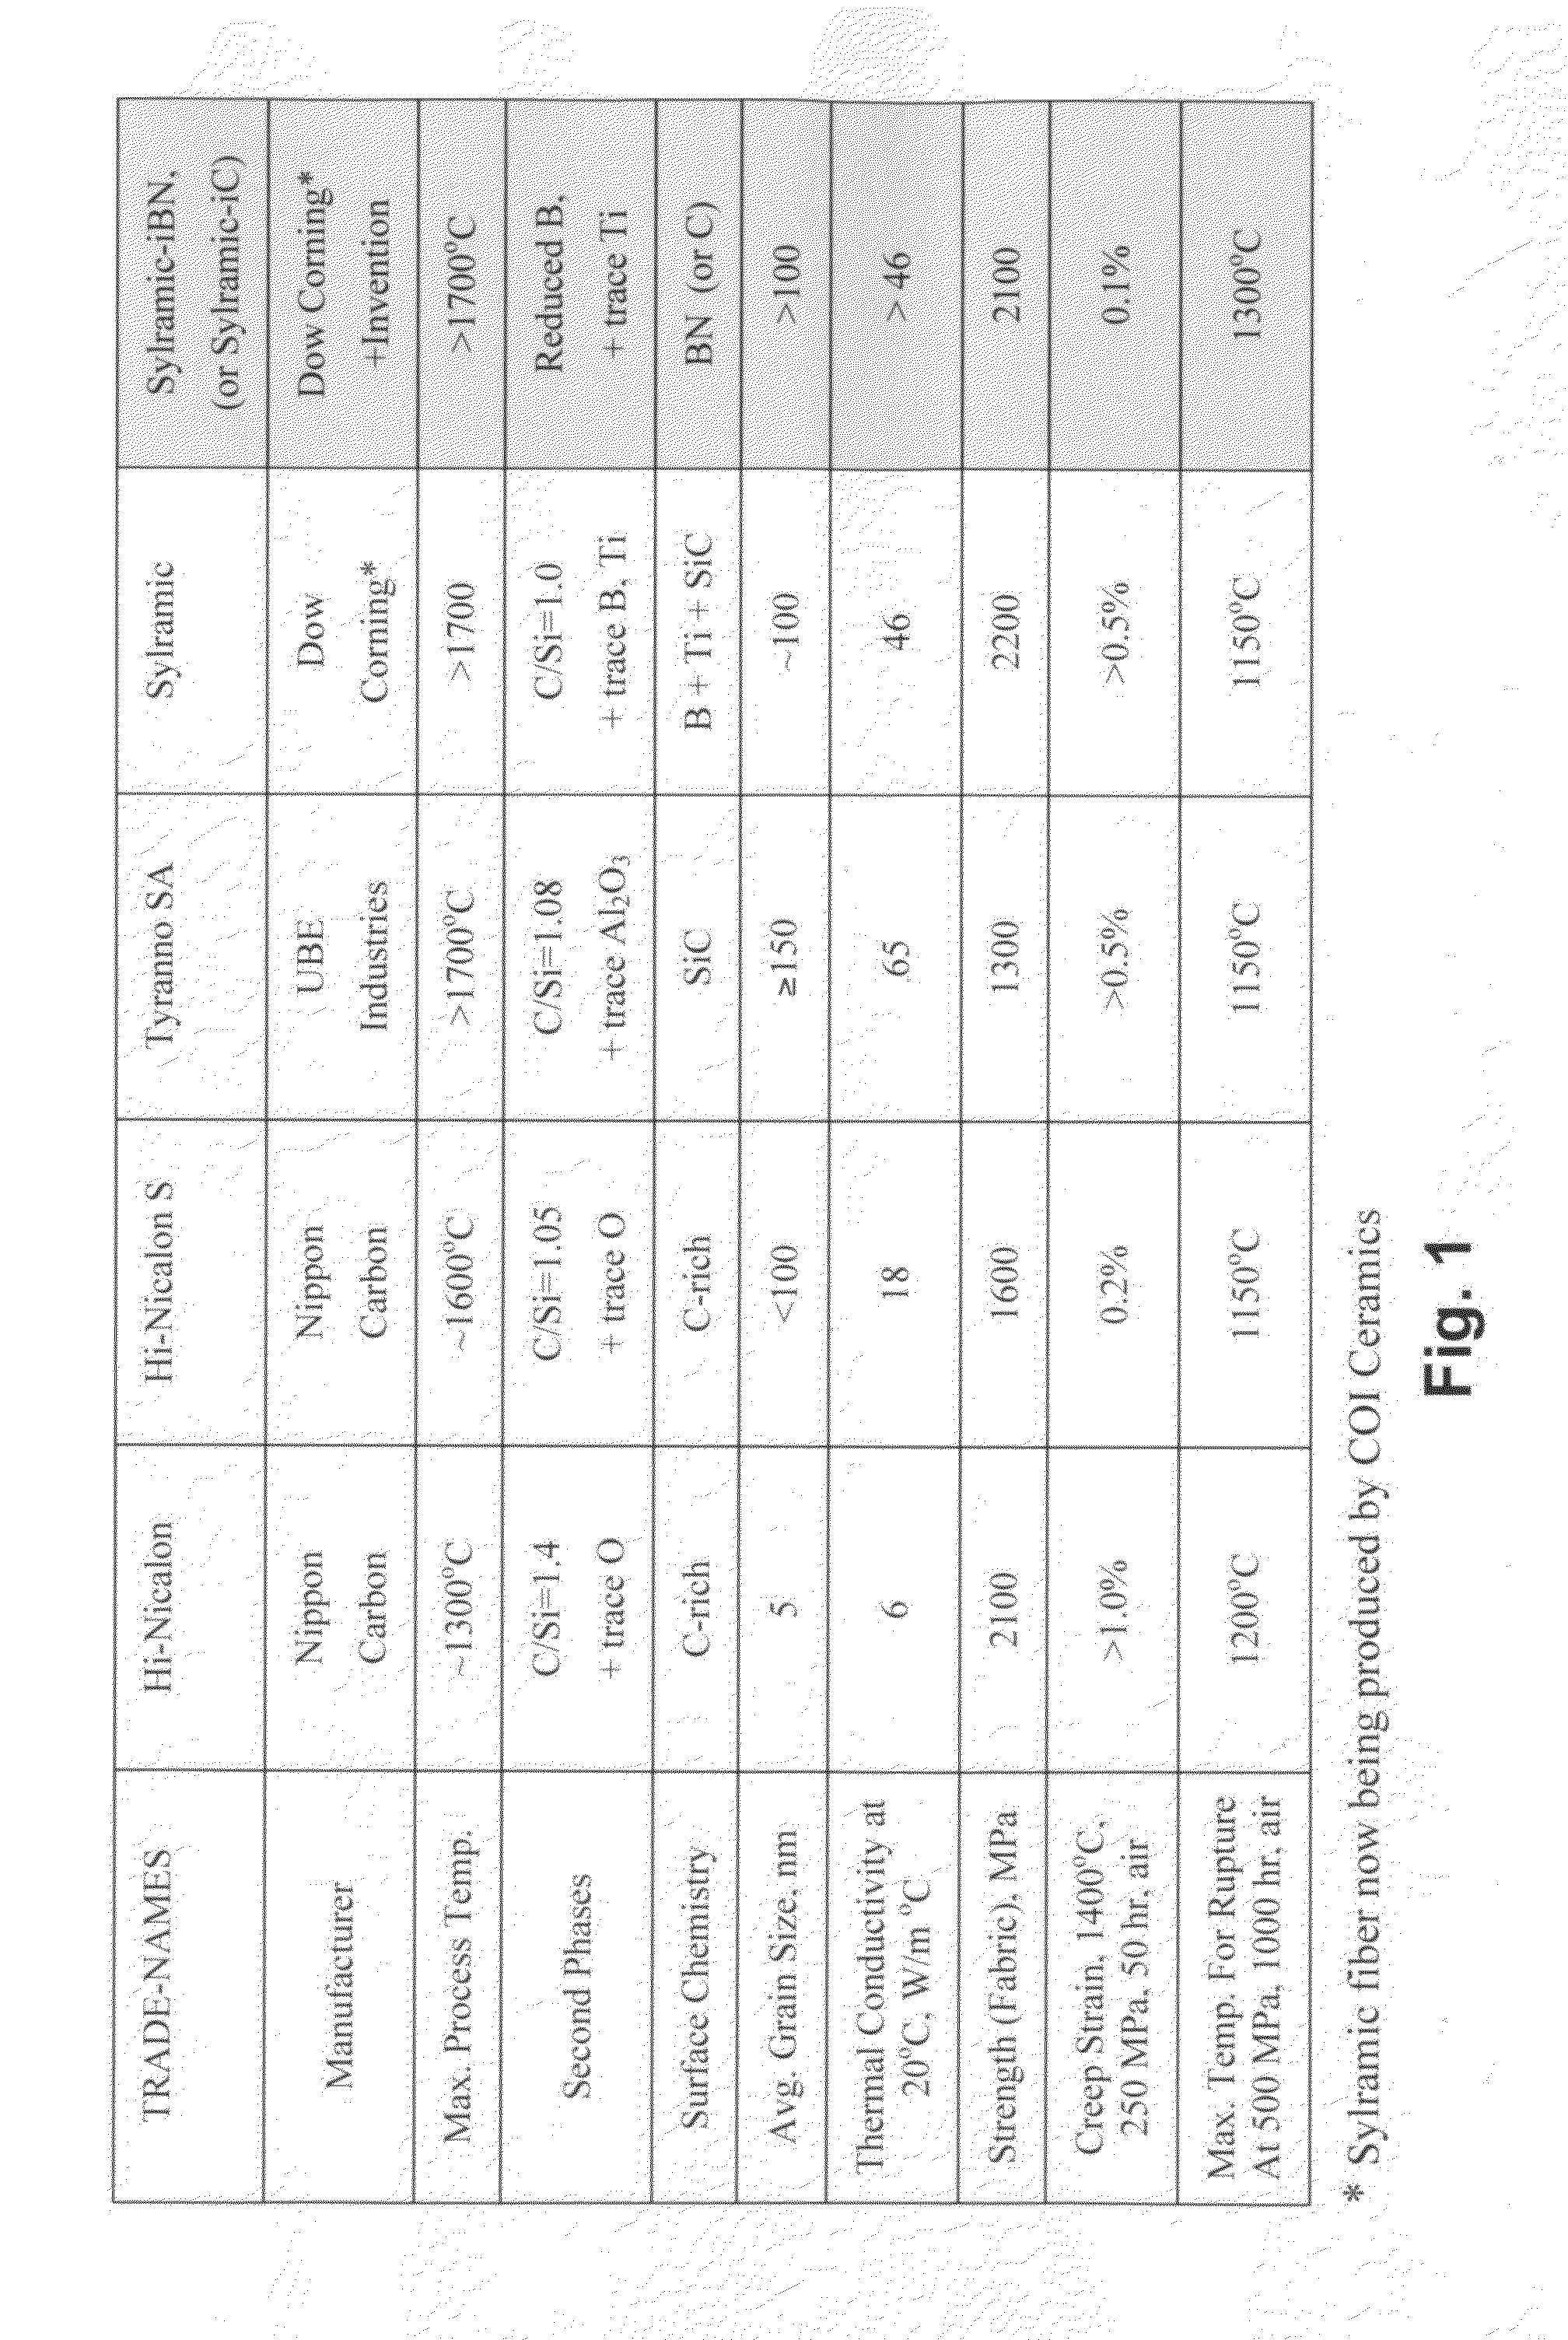 Methods for Producing High-Performance Silicon Carbide Fibers, Architectural Preforms, and High-Temperature Composite Structures